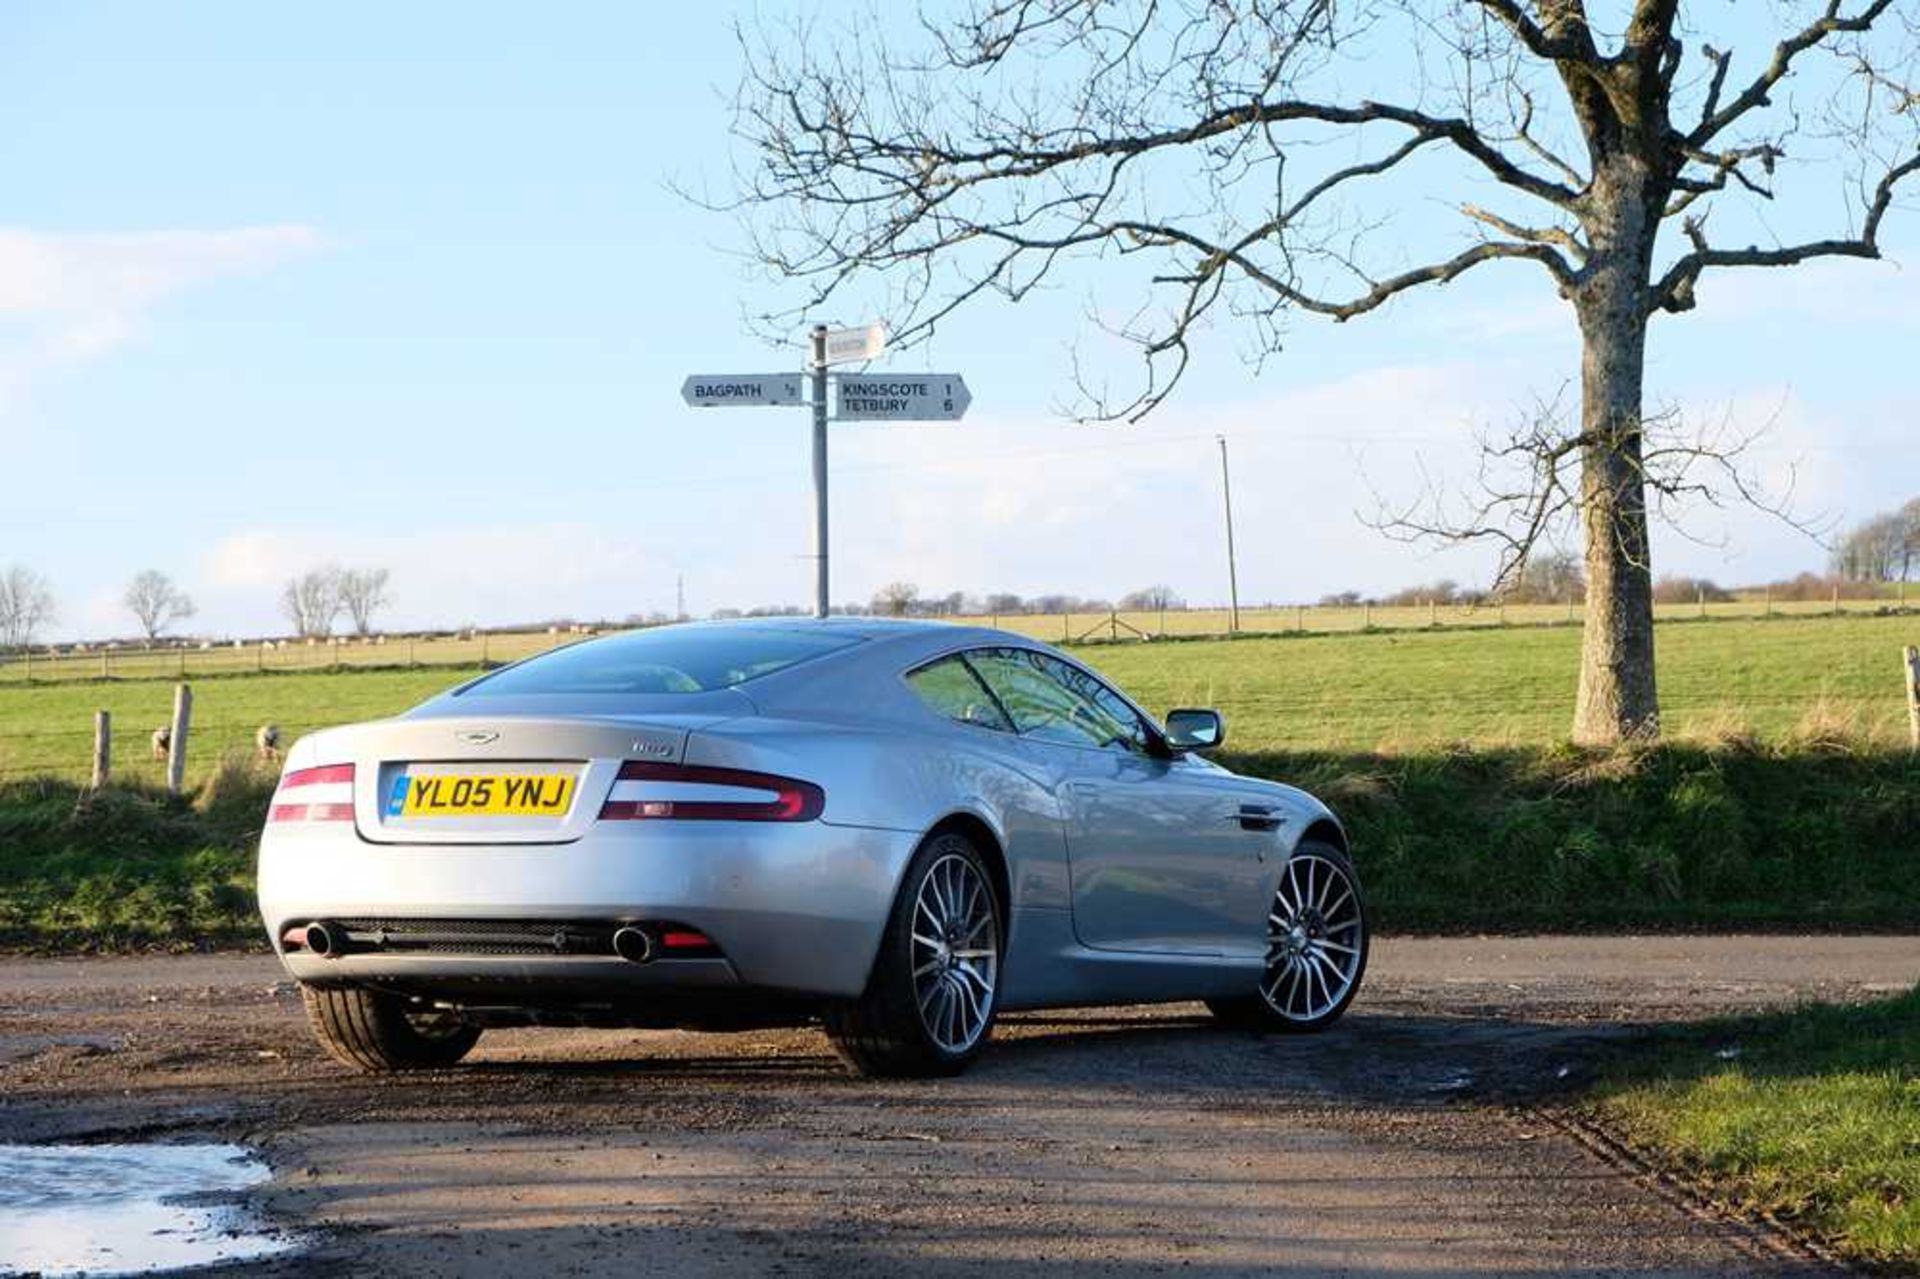 2005 Aston Martin DB9 c.25,000 from new and 4 former keepers - Image 17 of 59